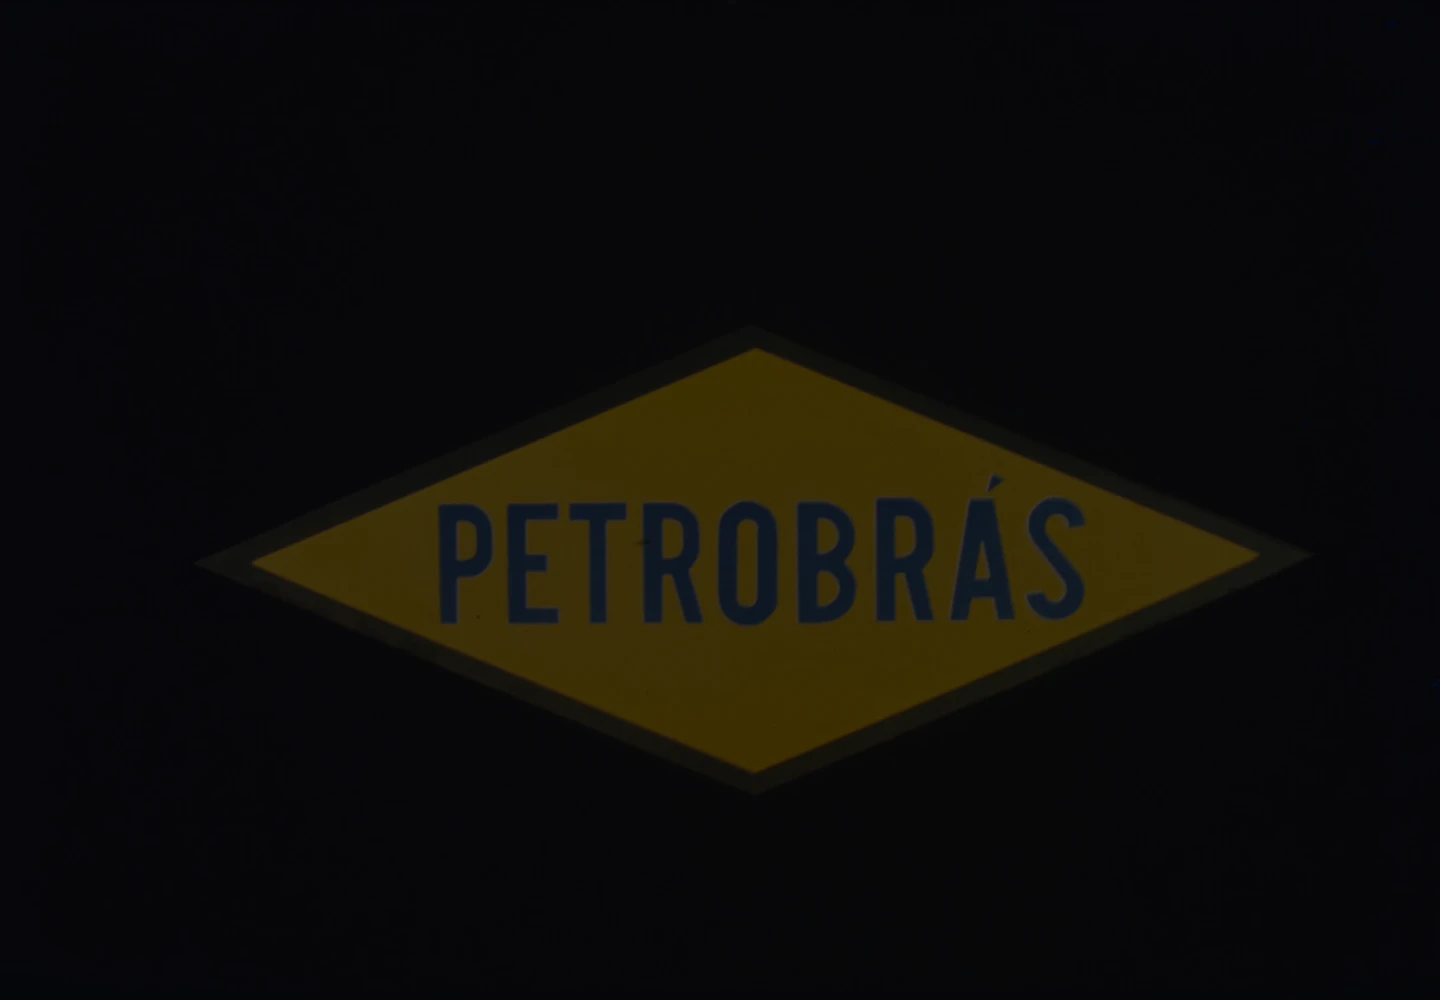 First Petrobras brand, from 1958; a yellow diamond with blue edges and the word Petrobrás in the center.